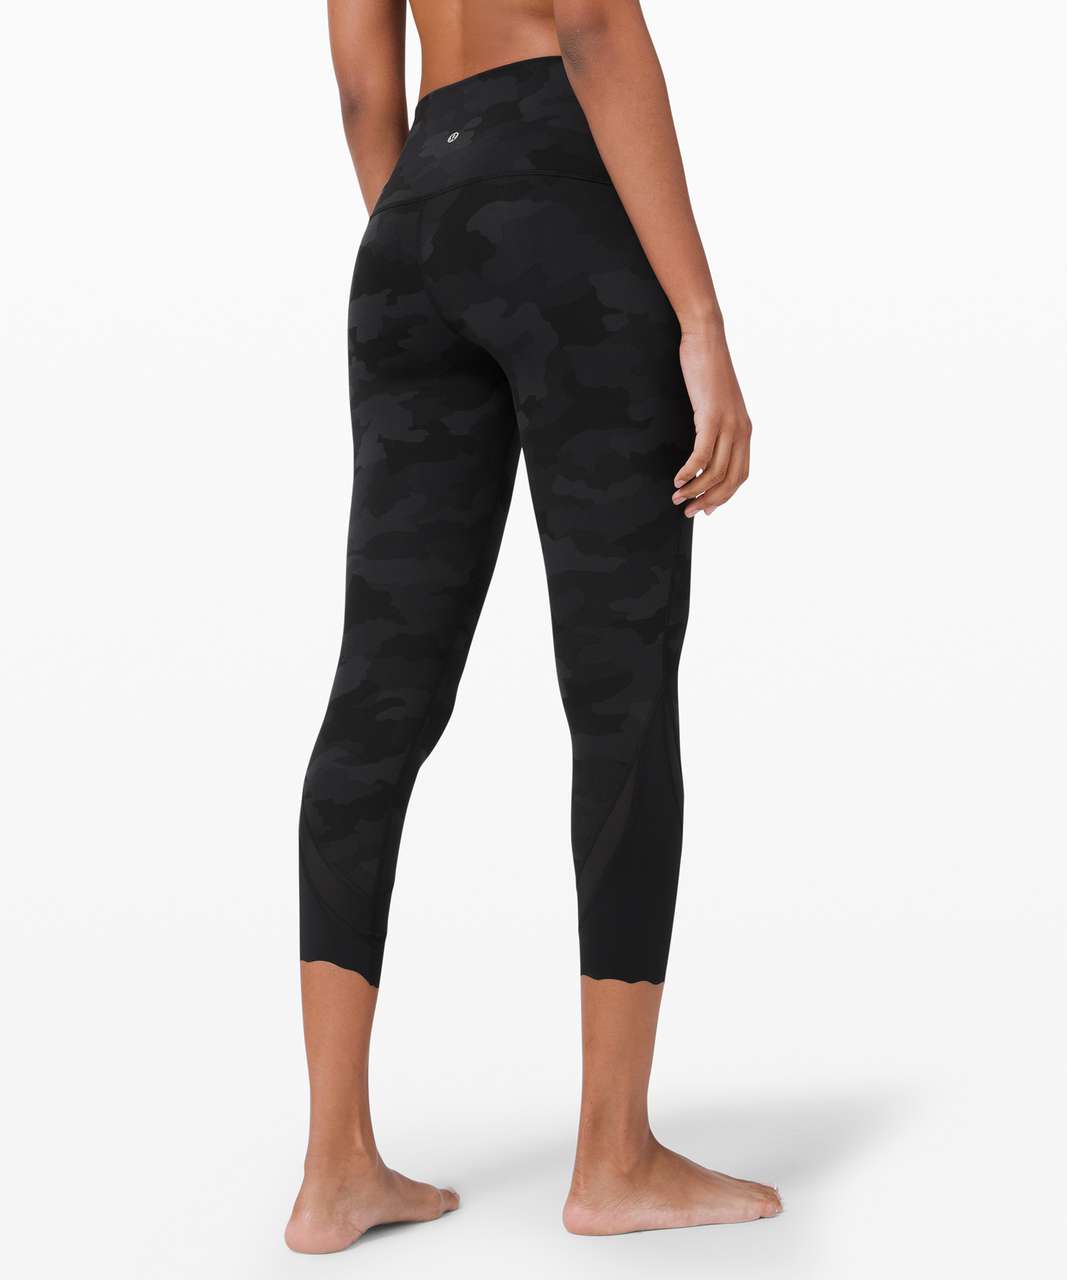 Lululemon Wunder Under Crop High-Rise *Roll Down Scallop Full-On Luxtreme 23" - Heritage 365 Camo Deep Coal Multi